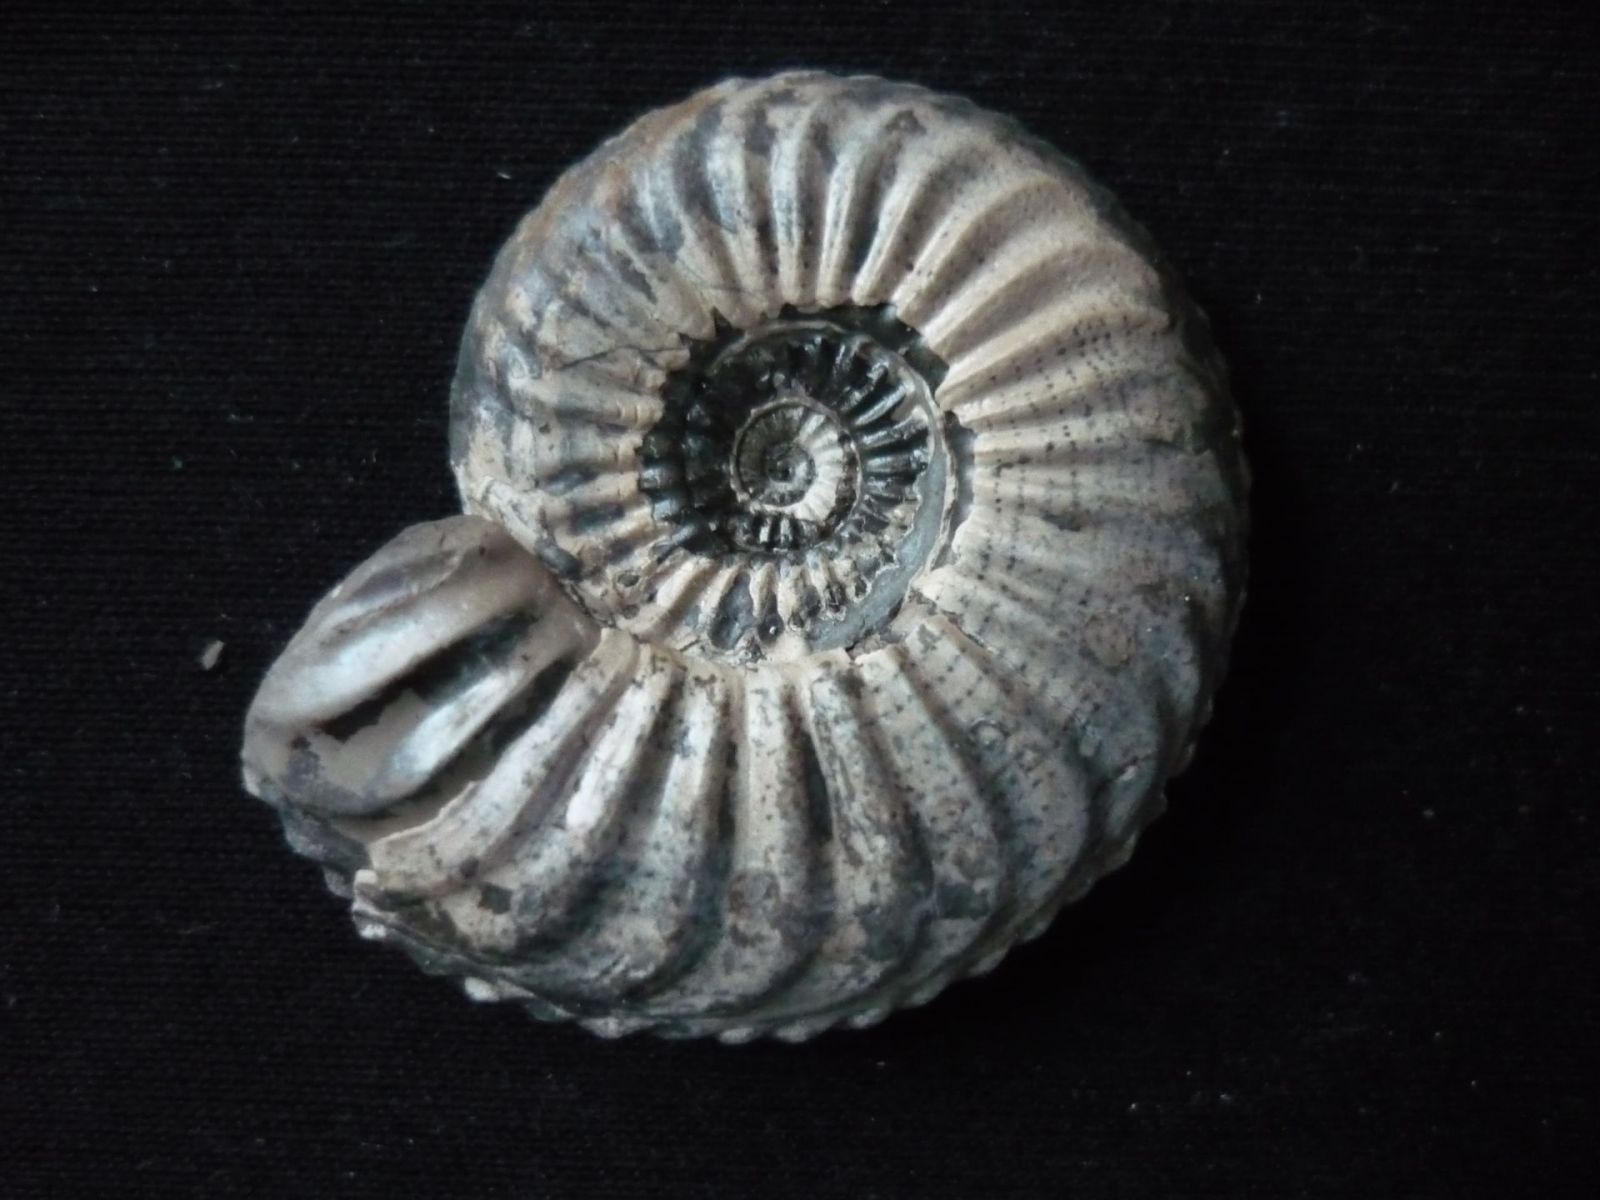 Early Jurassic Ammonites from Southern Germany